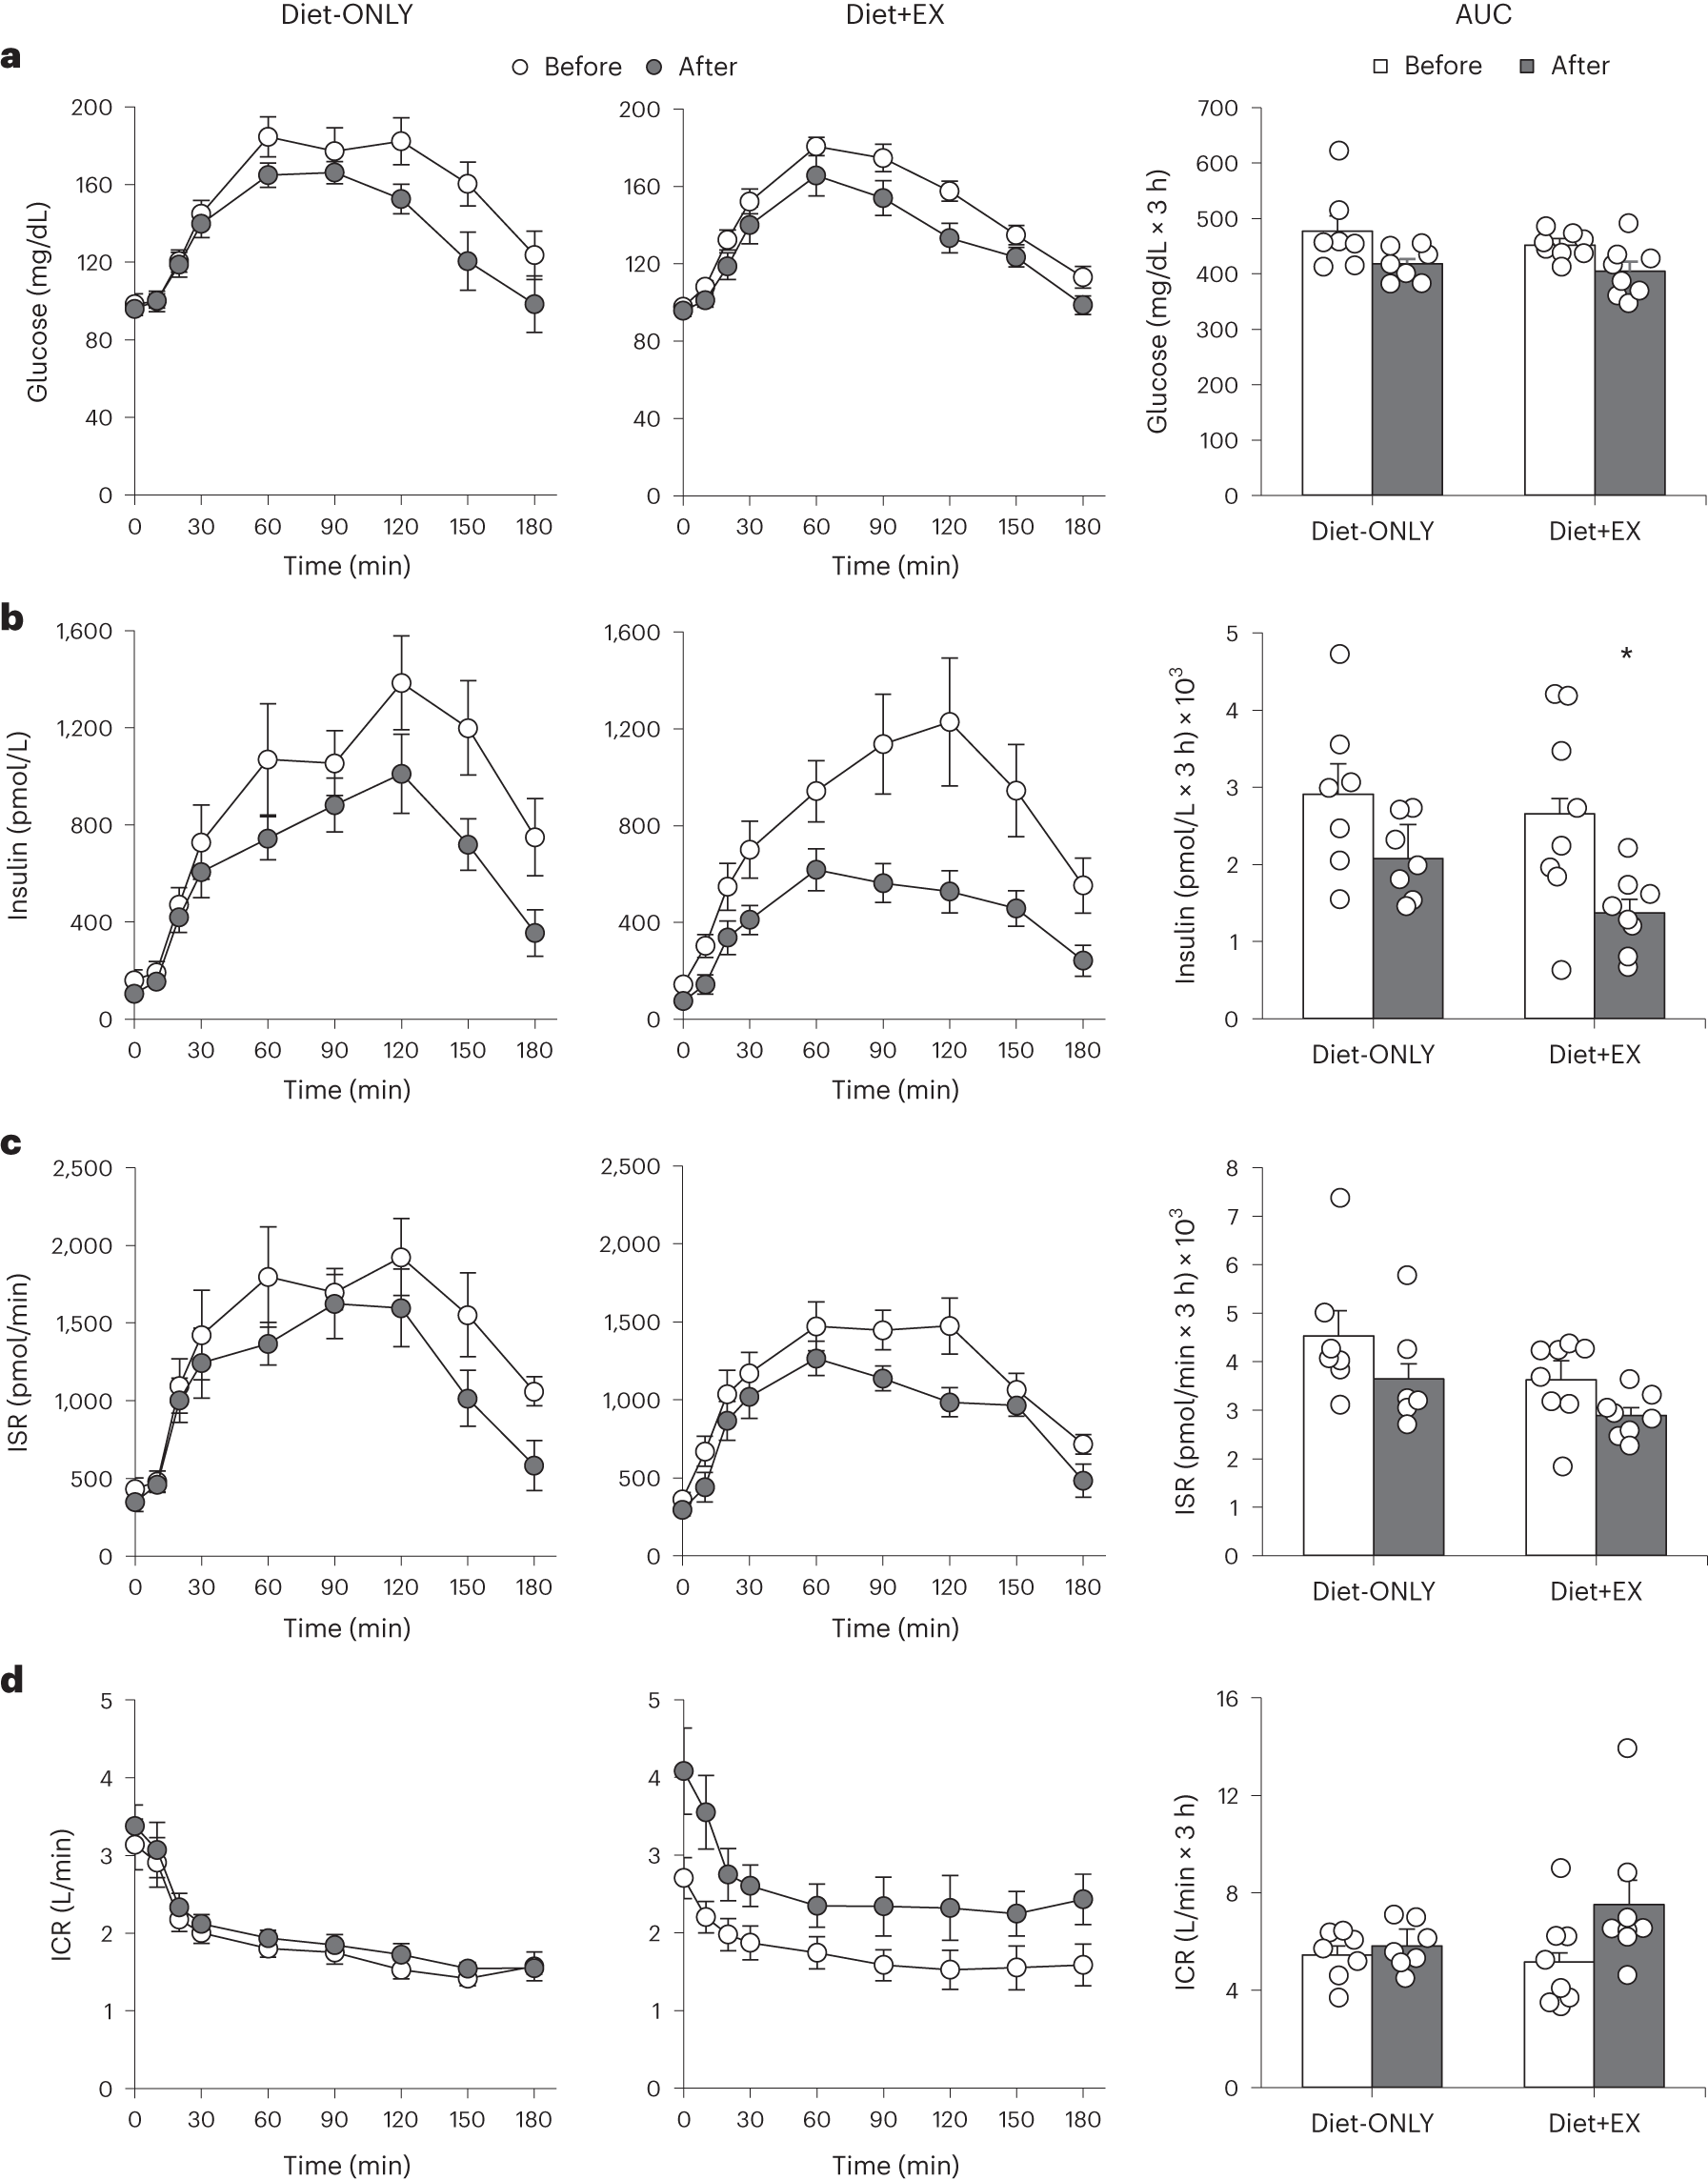 Dietary weight loss-induced improvements in metabolic function are